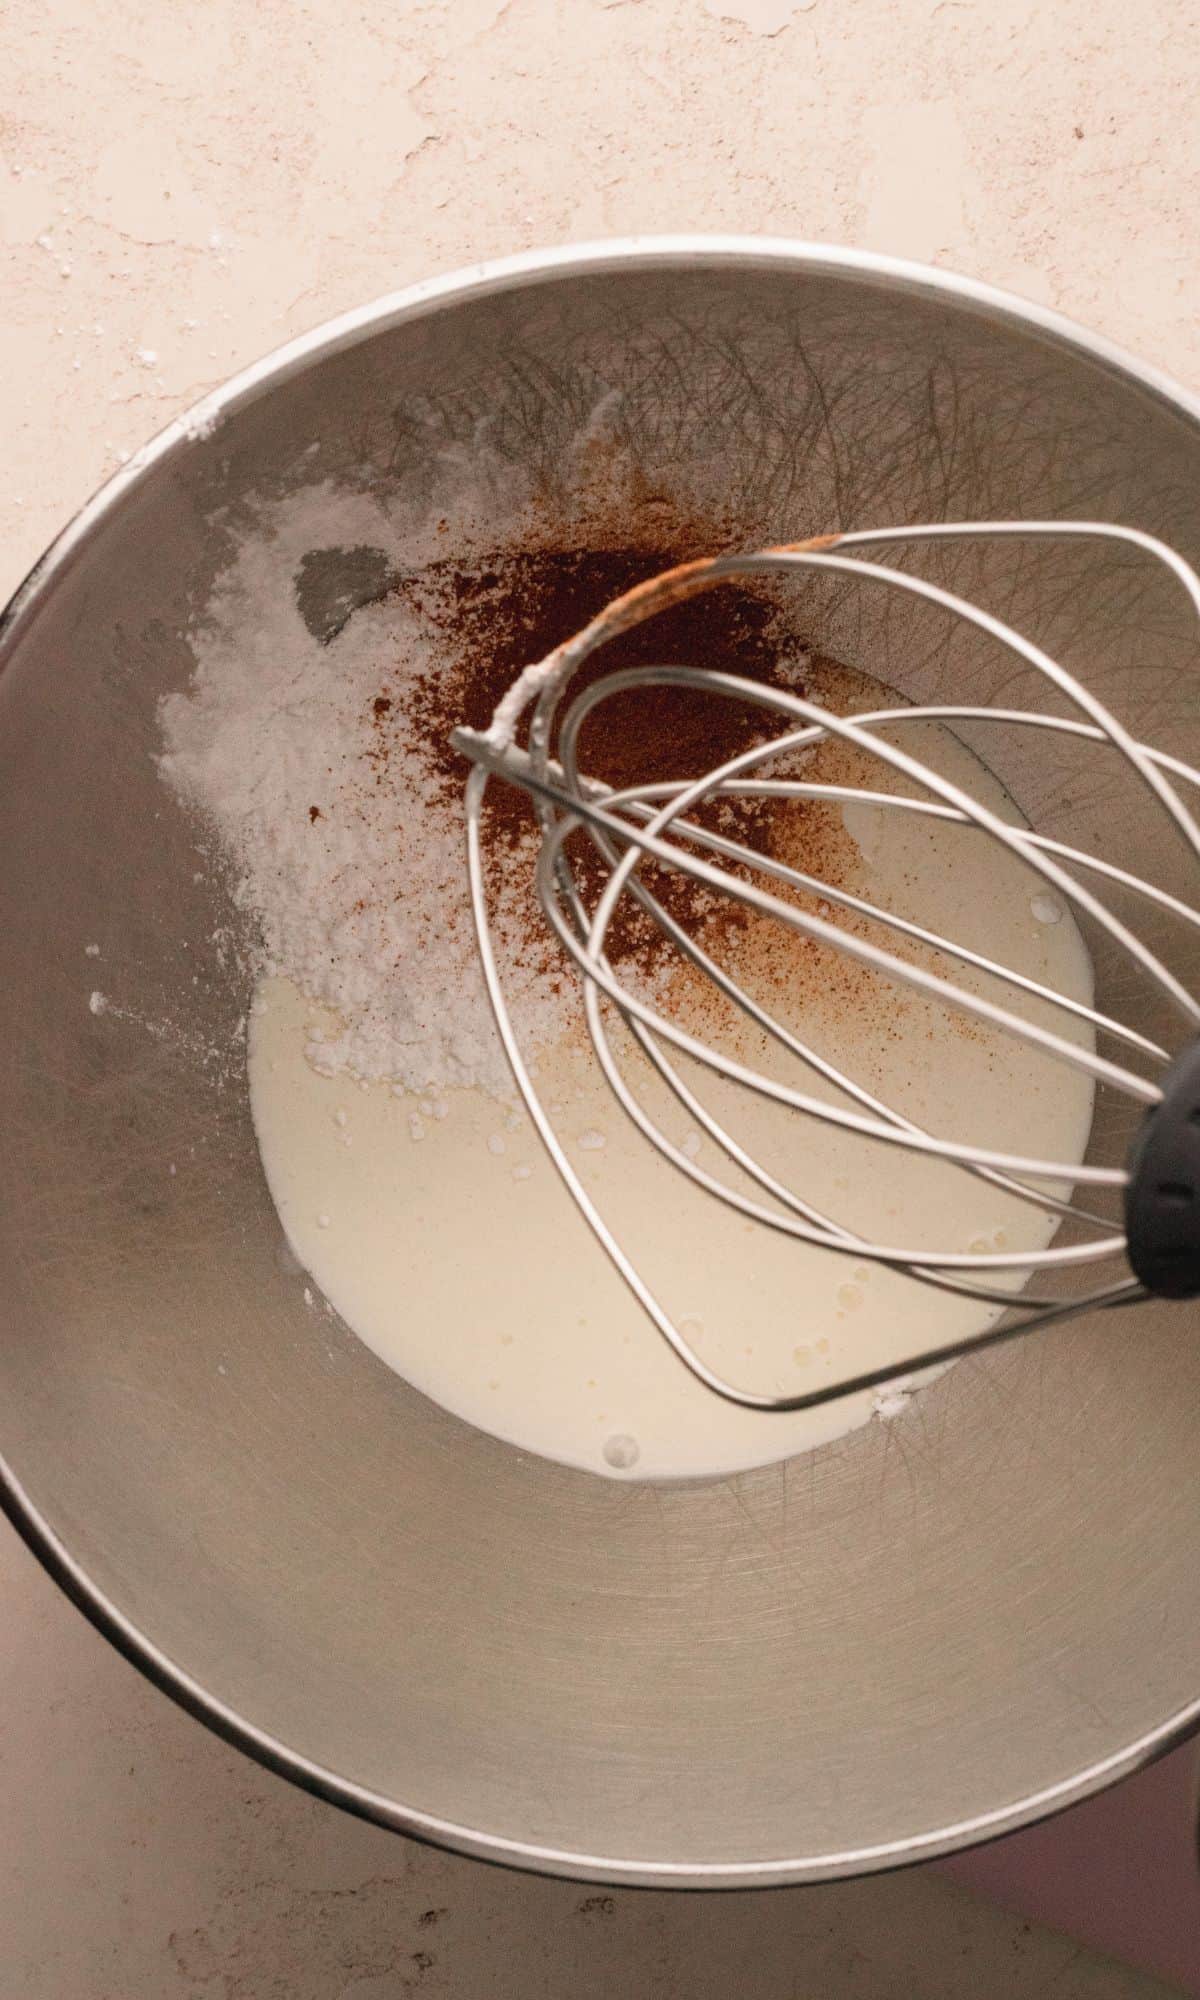 Spiced whipped cream ingredients in a metal bowl.